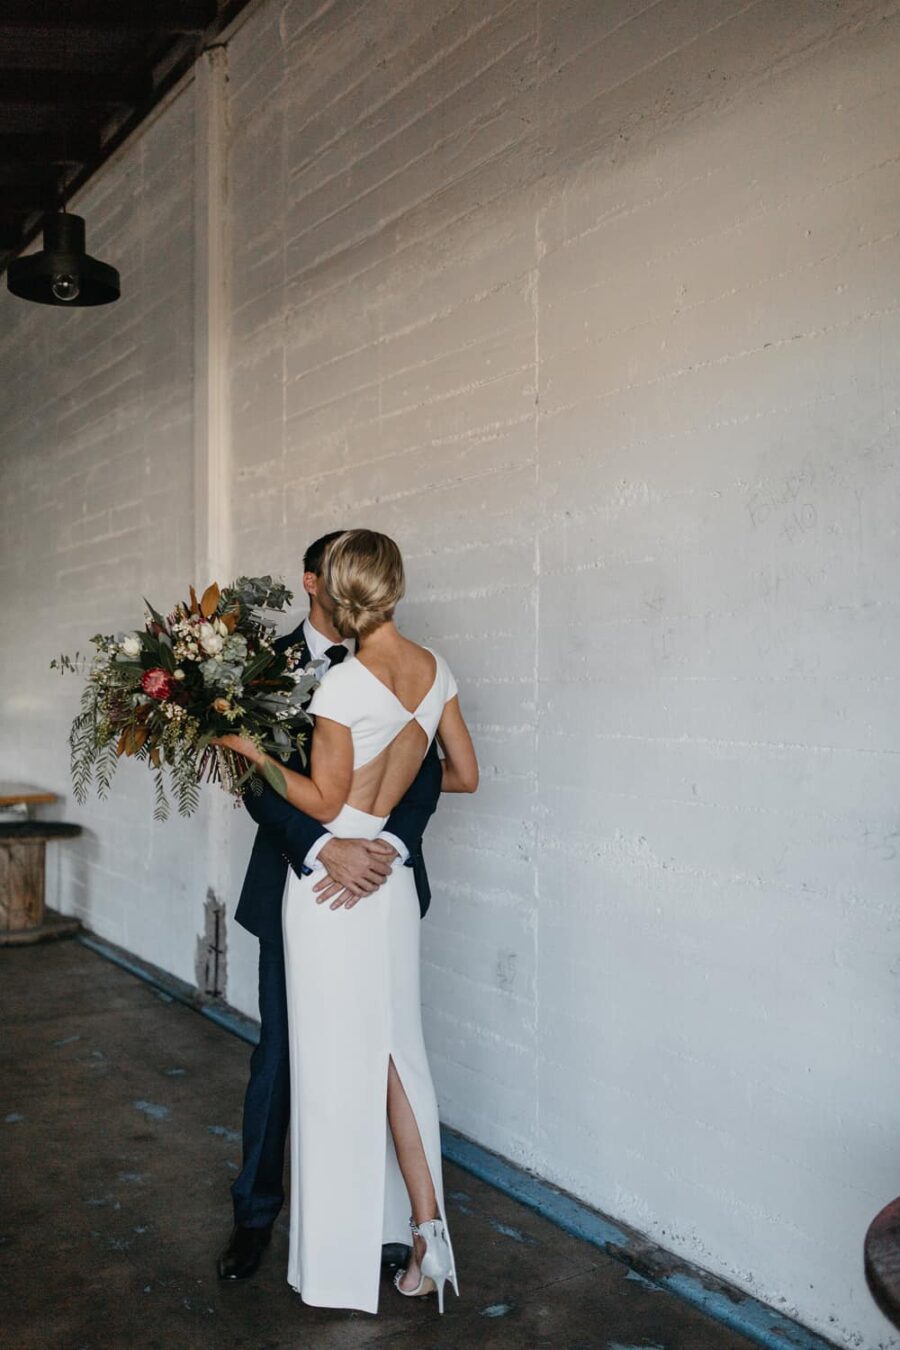 Modern Townsville warehouse wedding – photography by SB Creative Co.